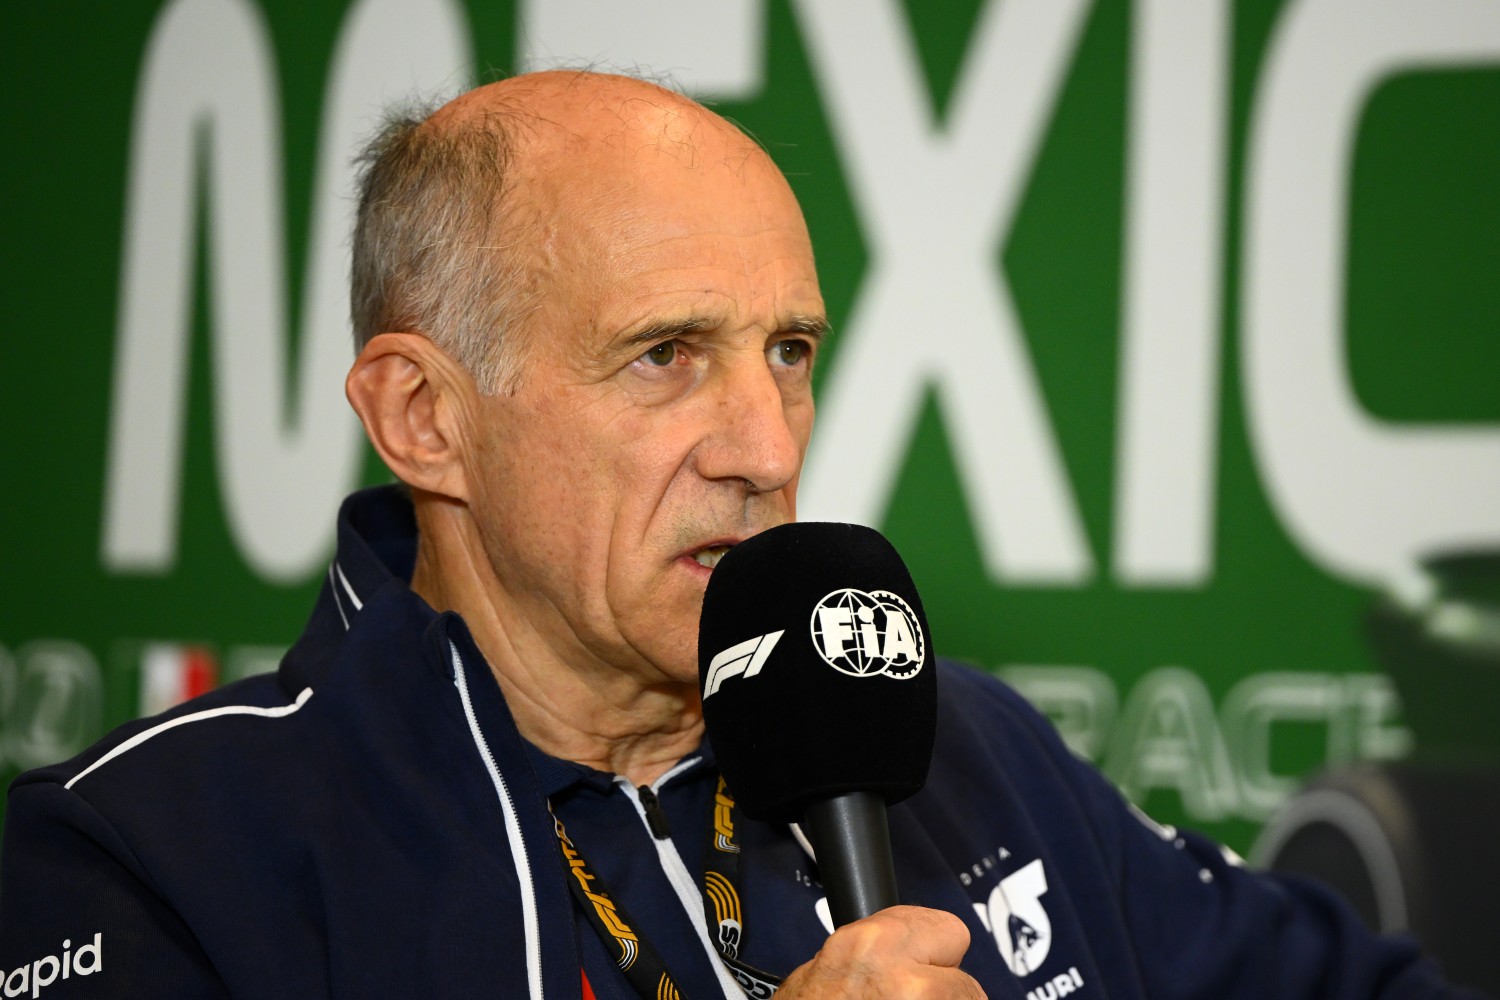 cuderia AlphaTauri Team Principal Franz Tost attends the Team Principals Press Conference during practice ahead of the F1 Grand Prix of Mexico at Autodromo Hermanos Rodriguez on October 27, 2023 in Mexico City, Mexico. (Photo by Clive Mason/Getty Images)